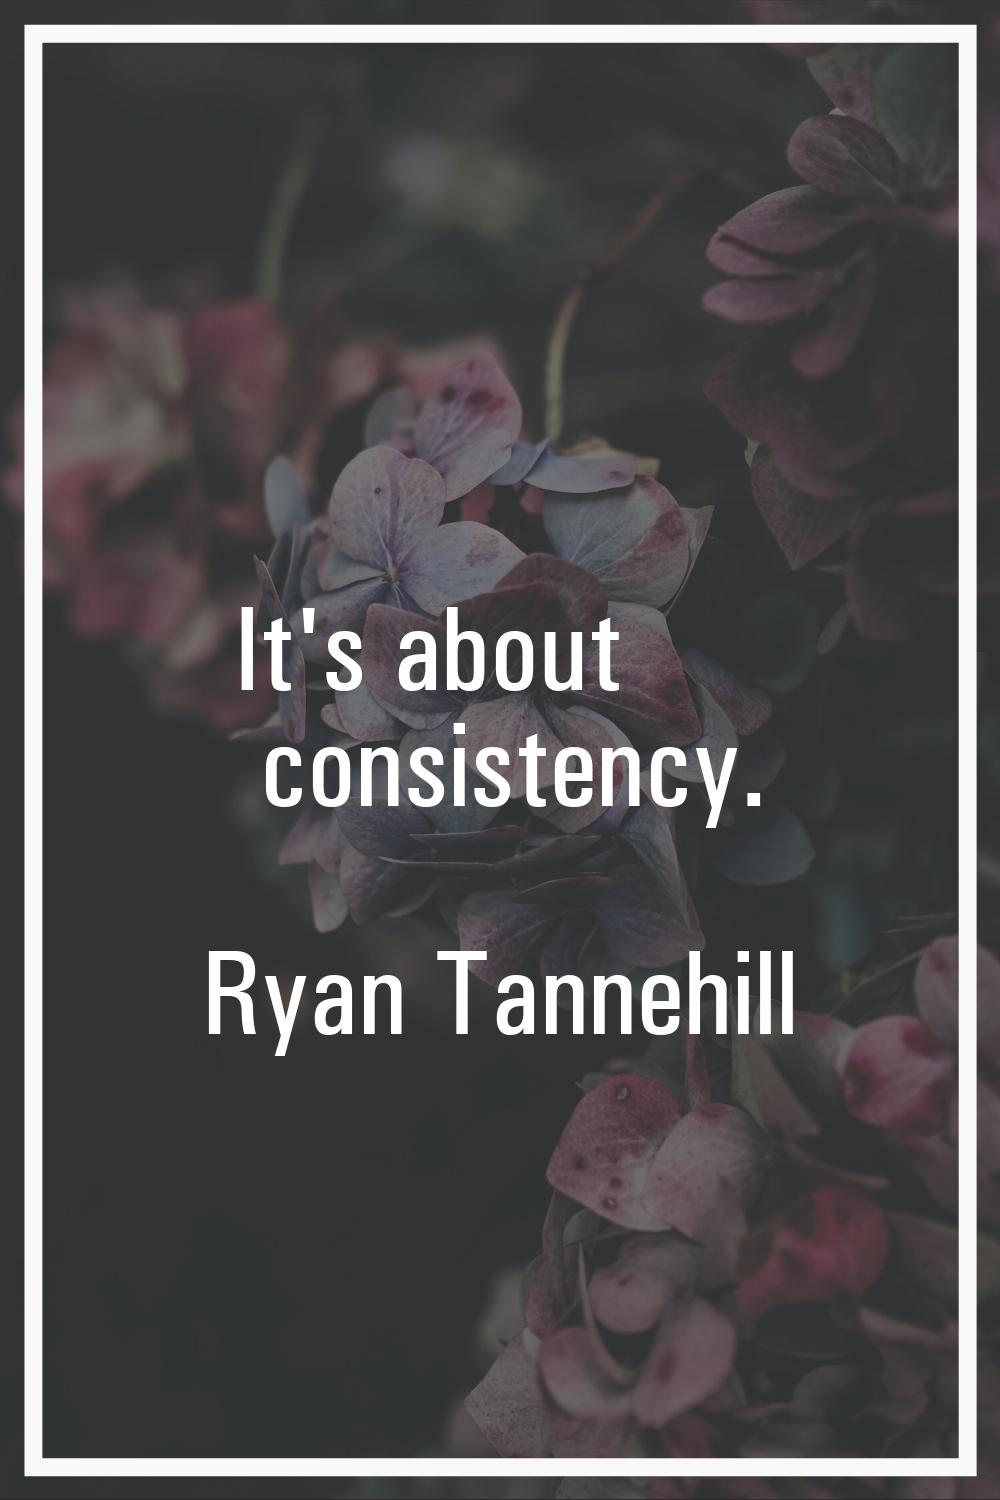 It's about consistency.